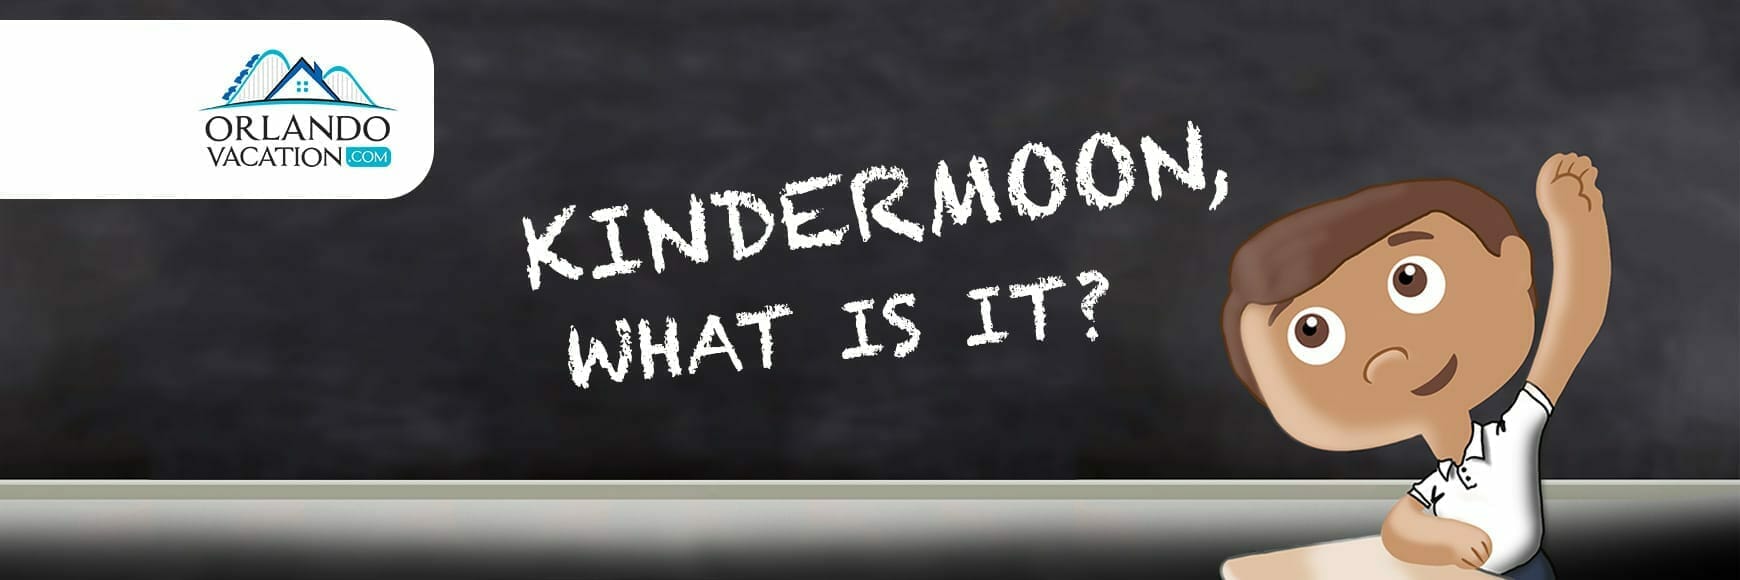 Kindermoon, What Is It?